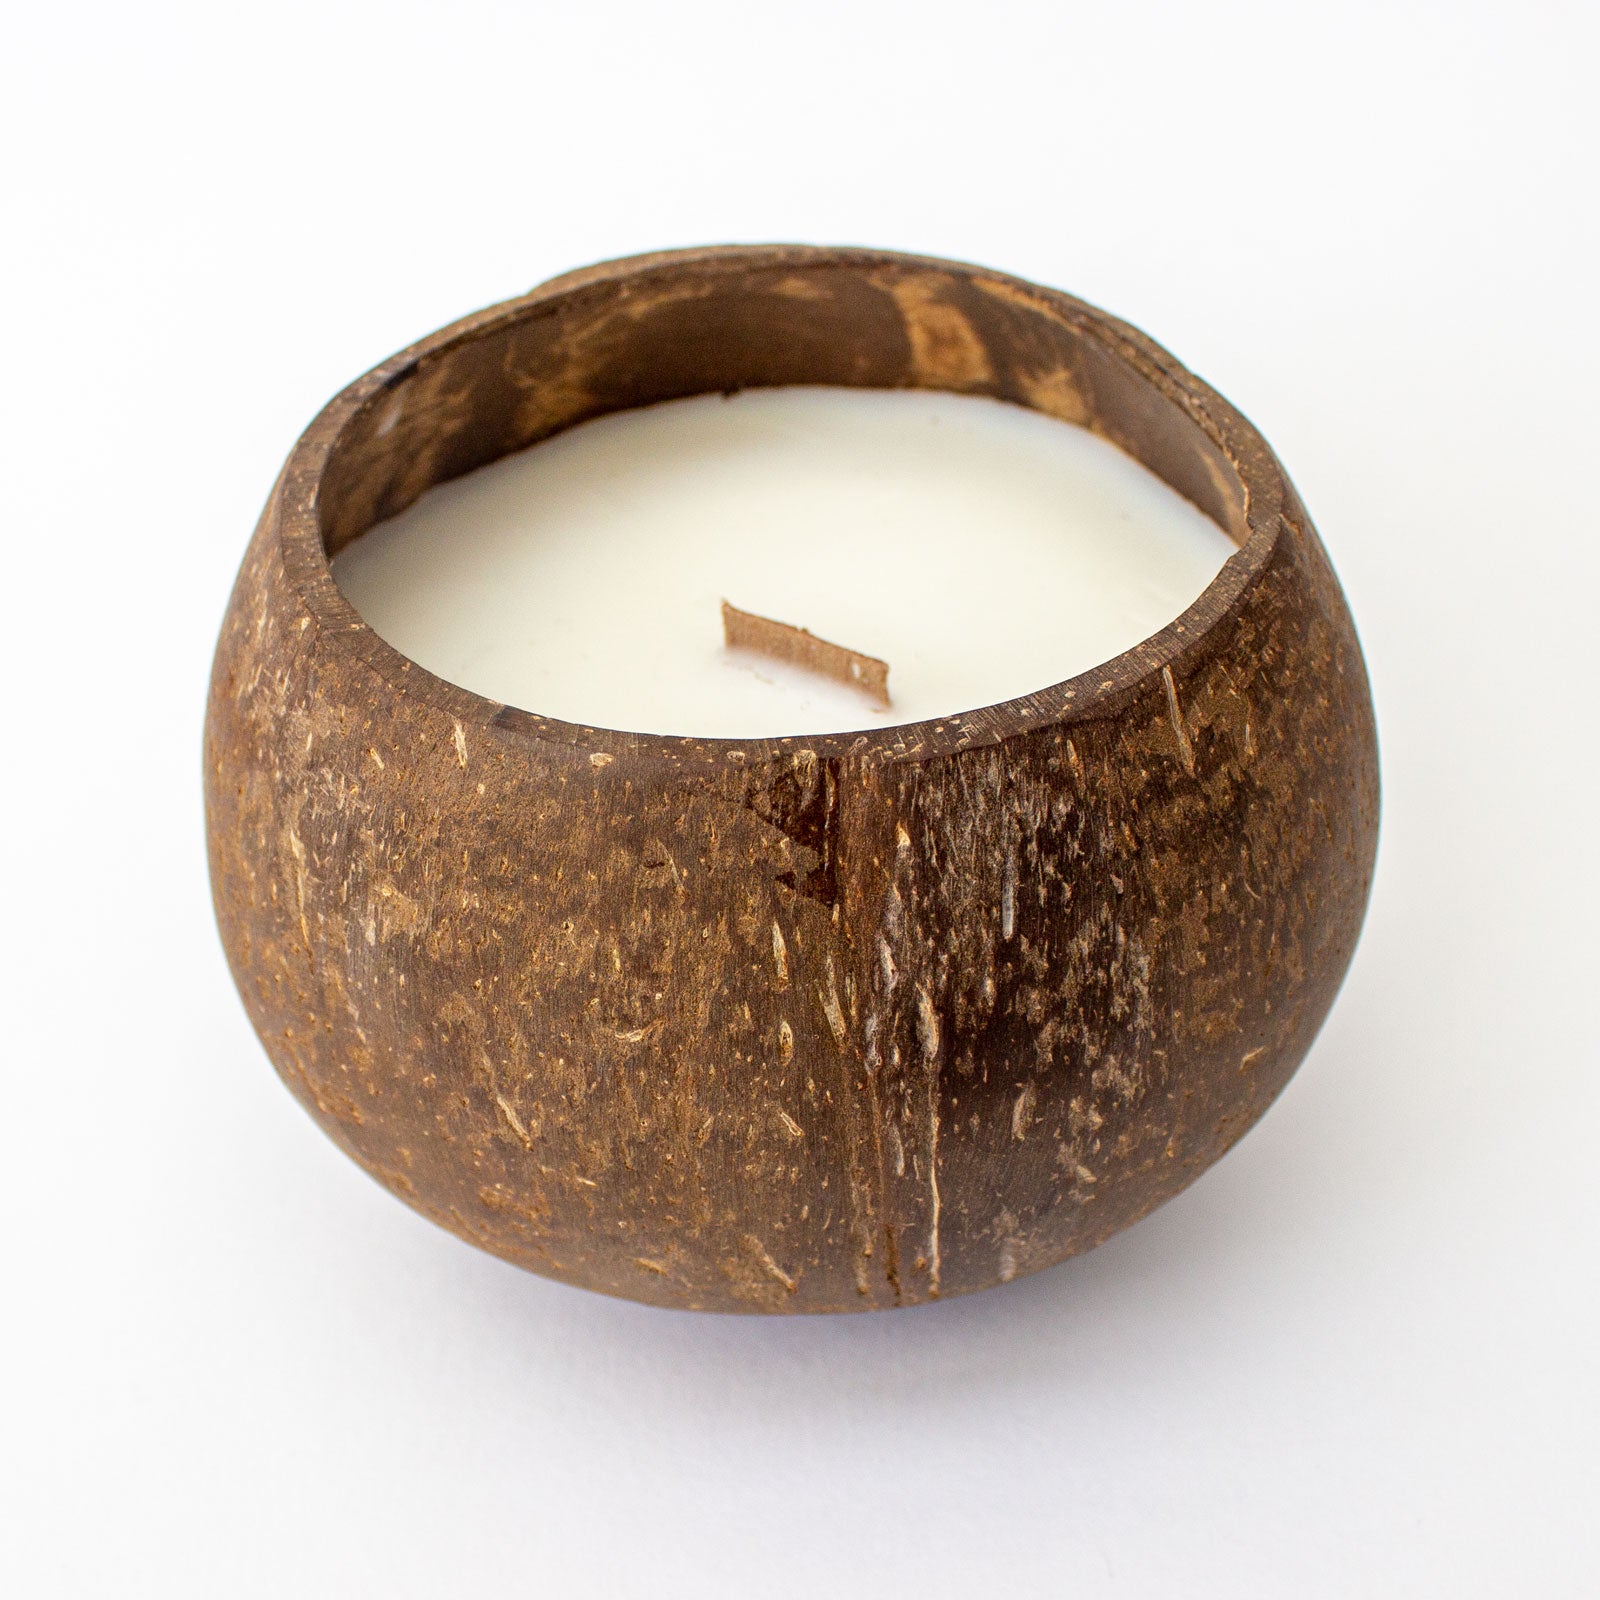 Happy Birthday 50 - Toasted Coconut Bowl Candle – Soy Wax - Gift Present